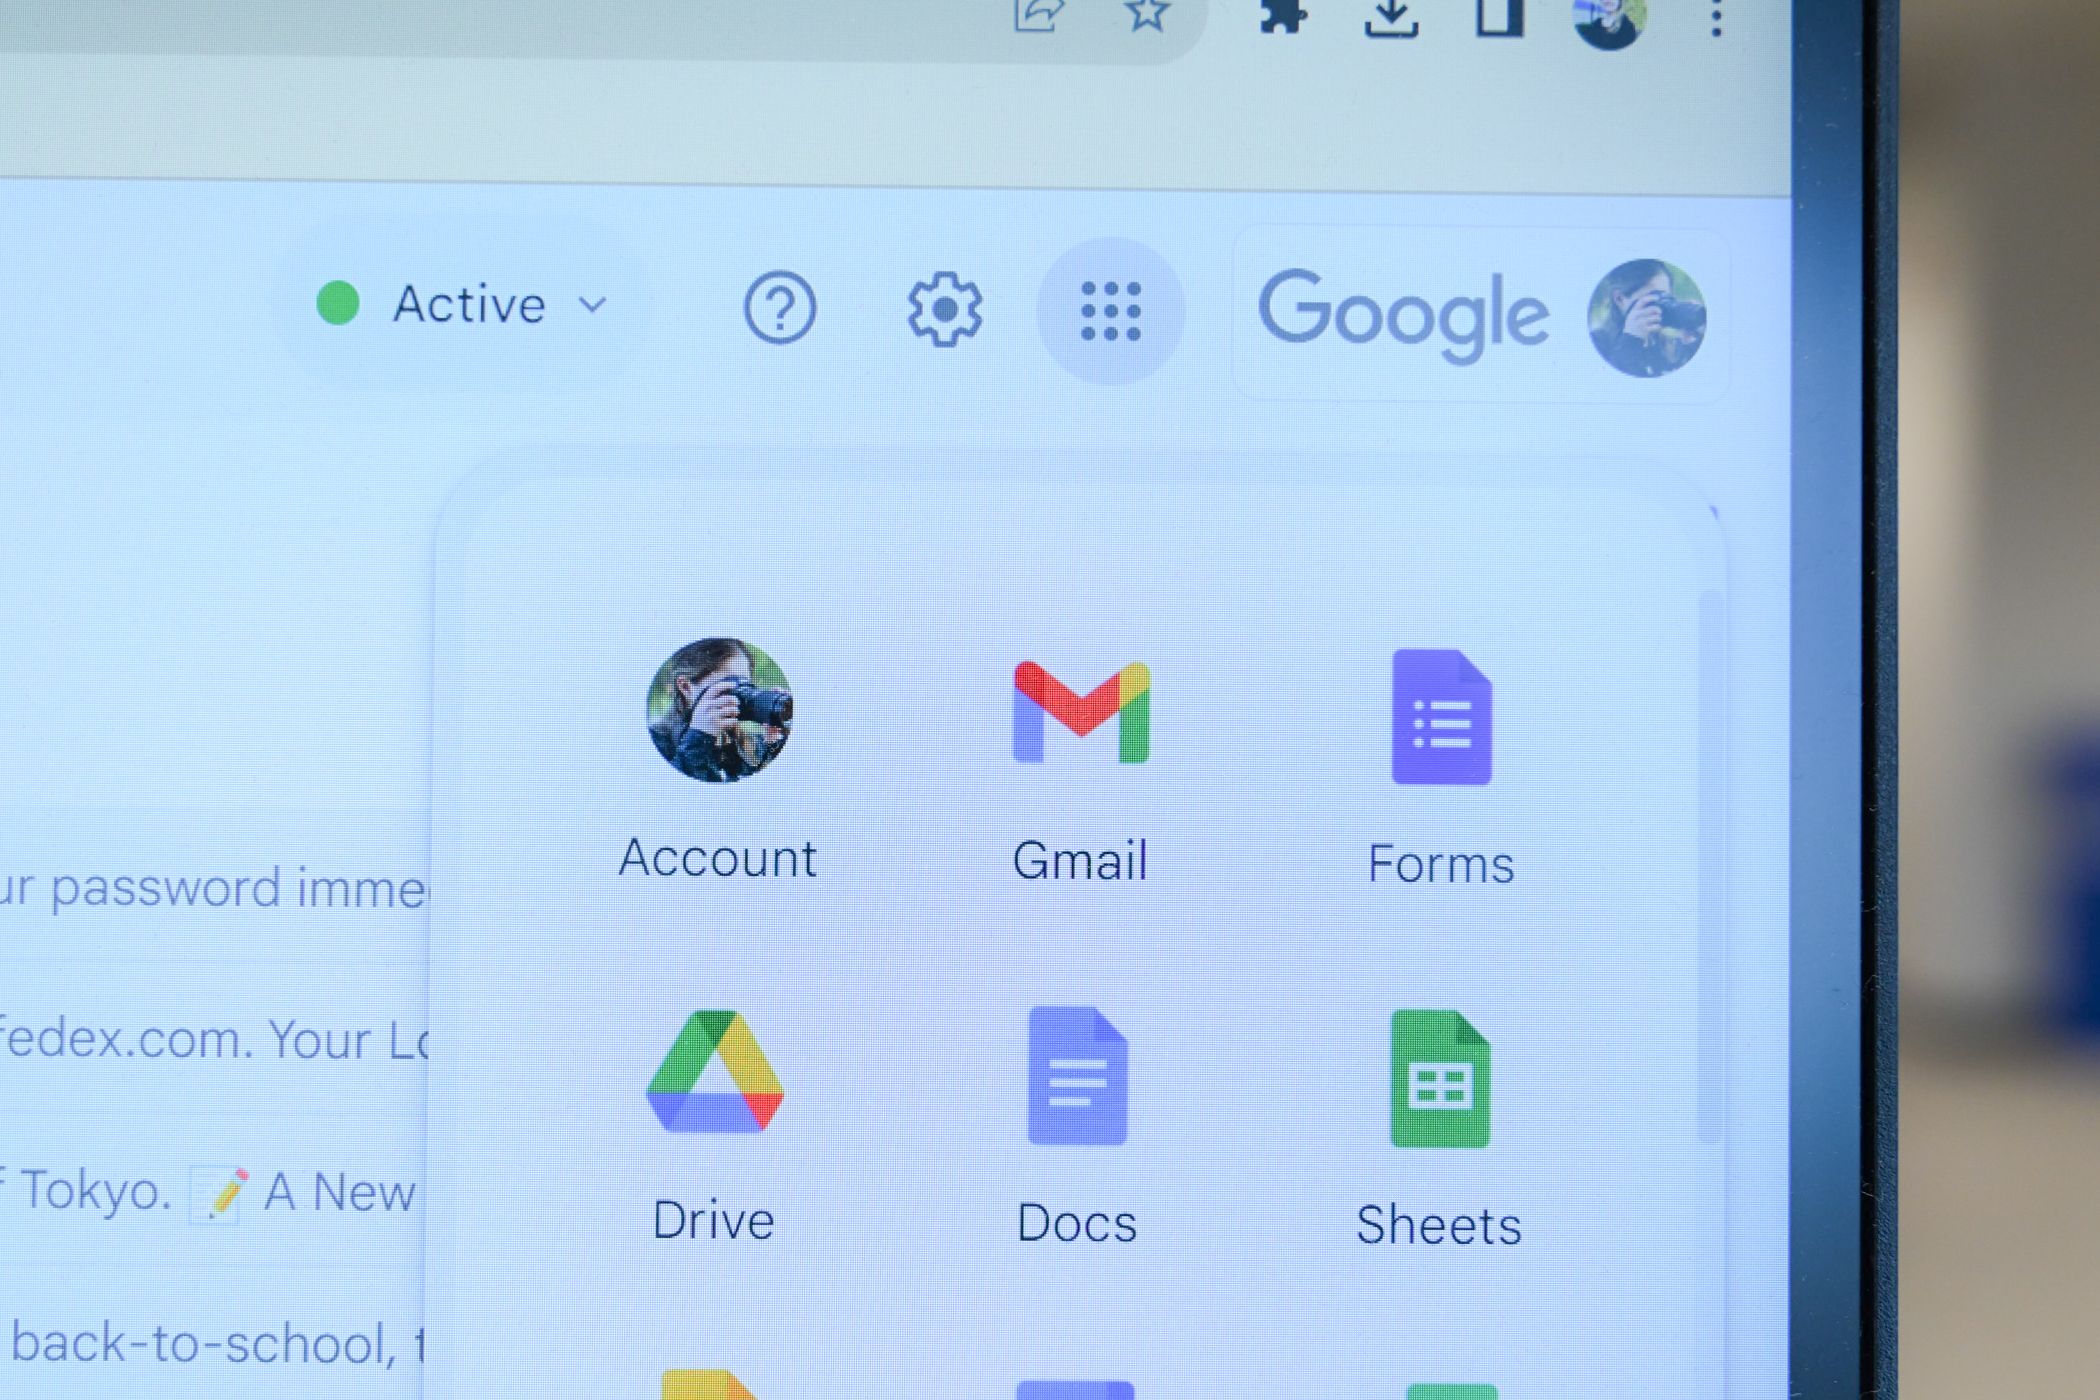 Some Google apps available in the box menu on Gmail. 